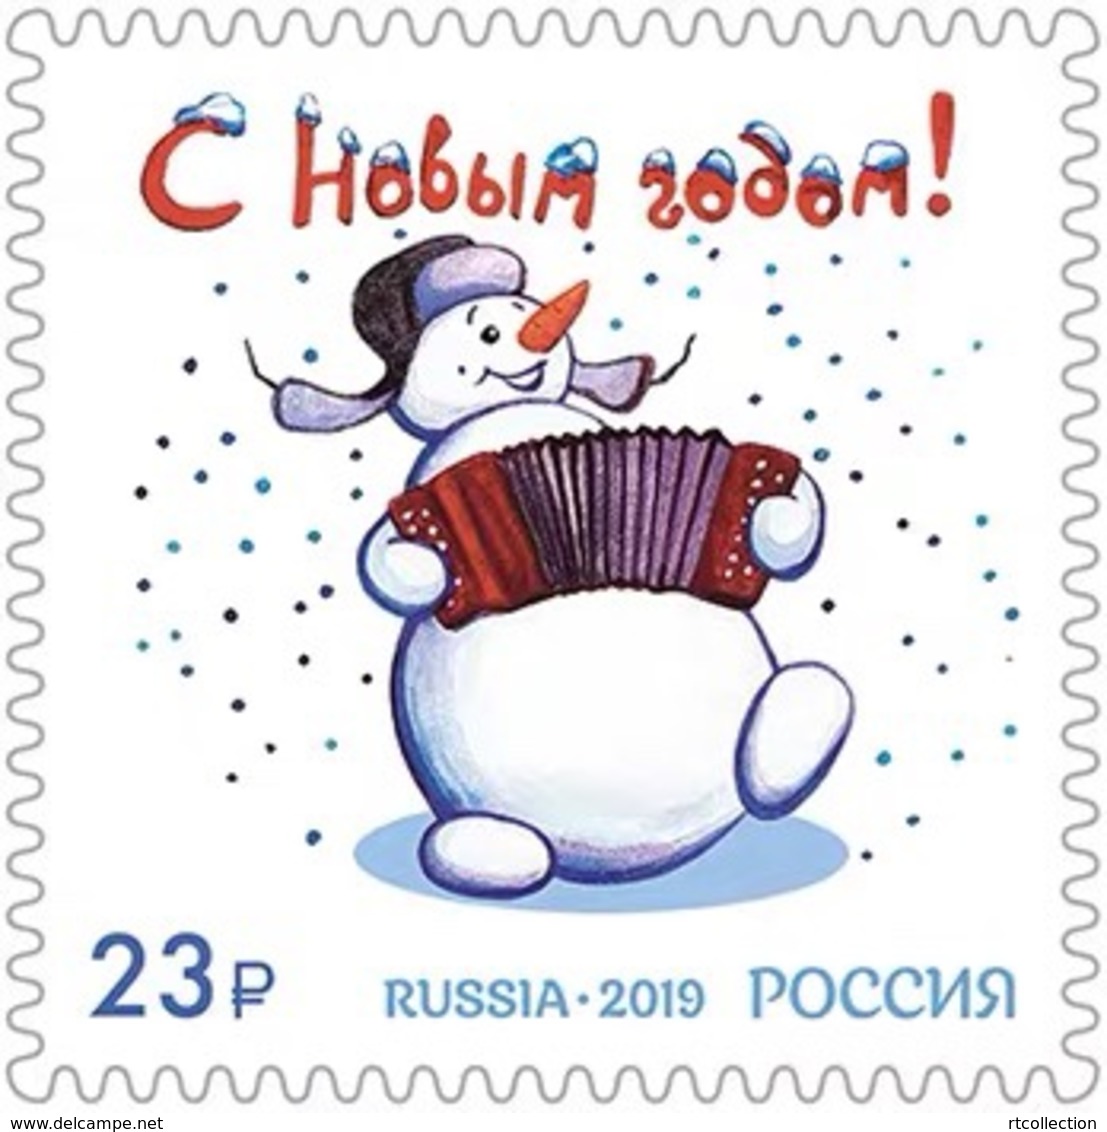 Russia 2019 - One Happy New Year Christmas Celebrations Holiday Greeting Snowman Art Cartoon Animation Music Stamp MNH - New Year